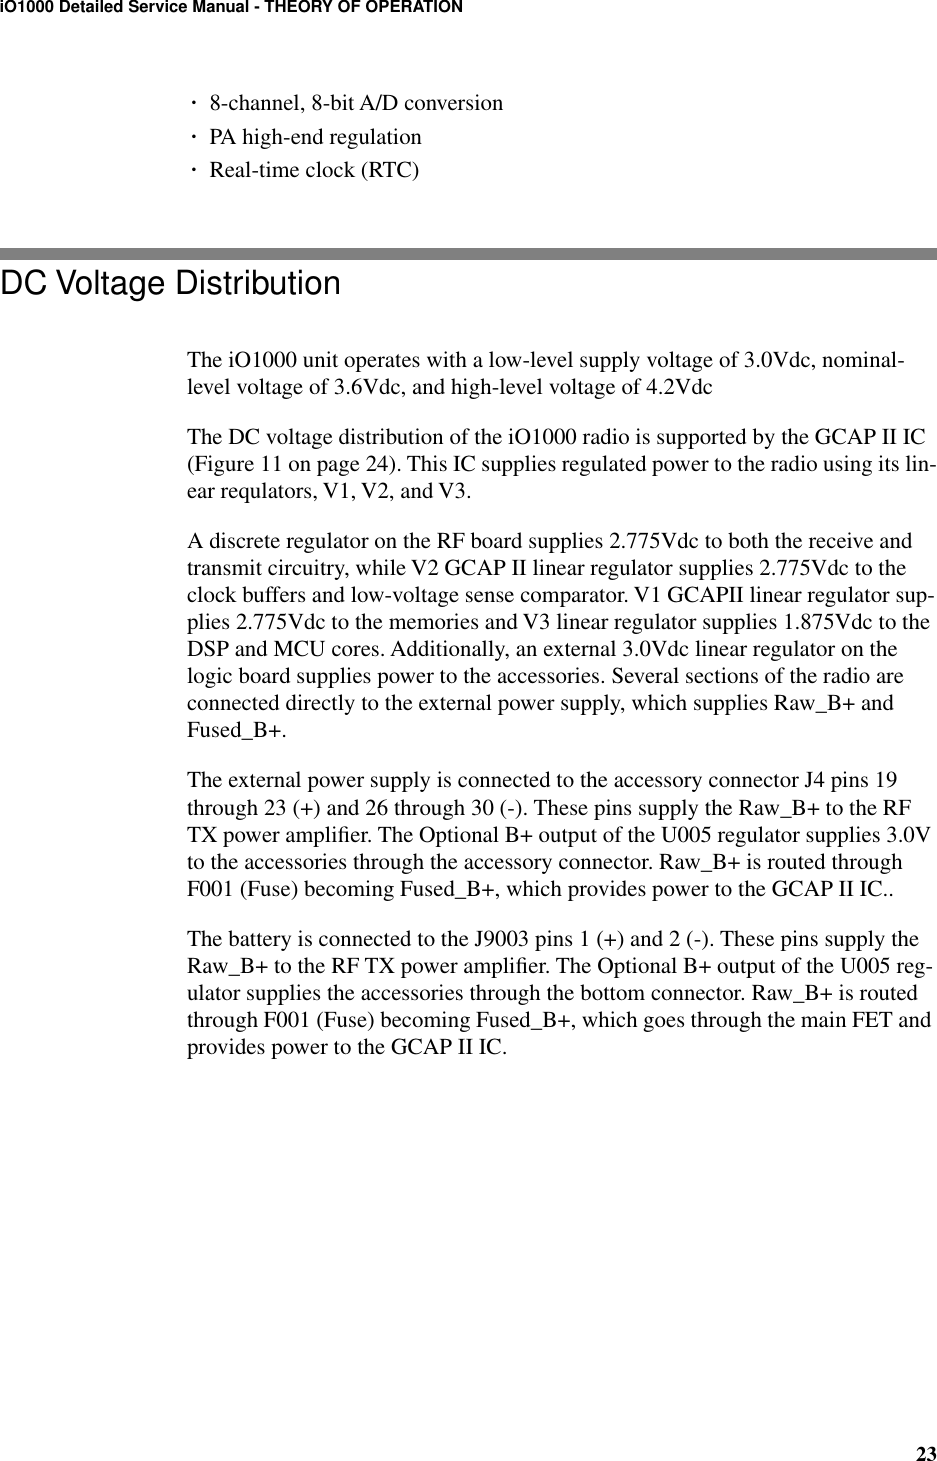 23iO1000 Detailed Service Manual - THEORY OF OPERATION¥8-channel, 8-bit A/D conversion¥PA high-end regulation¥Real-time clock (RTC)DC Voltage DistributionThe iO1000 unit operates with a low-level supply voltage of 3.0Vdc, nominal-level voltage of 3.6Vdc, and high-level voltage of 4.2VdcThe DC voltage distribution of the iO1000 radio is supported by the GCAP II IC (Figure 11 on page 24). This IC supplies regulated power to the radio using its lin-ear requlators, V1, V2, and V3.A discrete regulator on the RF board supplies 2.775Vdc to both the receive and transmit circuitry, while V2 GCAP II linear regulator supplies 2.775Vdc to the clock buffers and low-voltage sense comparator. V1 GCAPII linear regulator sup-plies 2.775Vdc to the memories and V3 linear regulator supplies 1.875Vdc to the DSP and MCU cores. Additionally, an external 3.0Vdc linear regulator on the logic board supplies power to the accessories. Several sections of the radio are connected directly to the external power supply, which supplies Raw_B+ and Fused_B+.The external power supply is connected to the accessory connector J4 pins 19 through 23 (+) and 26 through 30 (-). These pins supply the Raw_B+ to the RF TX power ampliﬁer. The Optional B+ output of the U005 regulator supplies 3.0V to the accessories through the accessory connector. Raw_B+ is routed through F001 (Fuse) becoming Fused_B+, which provides power to the GCAP II IC..The battery is connected to the J9003 pins 1 (+) and 2 (-). These pins supply the Raw_B+ to the RF TX power ampliﬁer. The Optional B+ output of the U005 reg-ulator supplies the accessories through the bottom connector. Raw_B+ is routed through F001 (Fuse) becoming Fused_B+, which goes through the main FET and provides power to the GCAP II IC. 